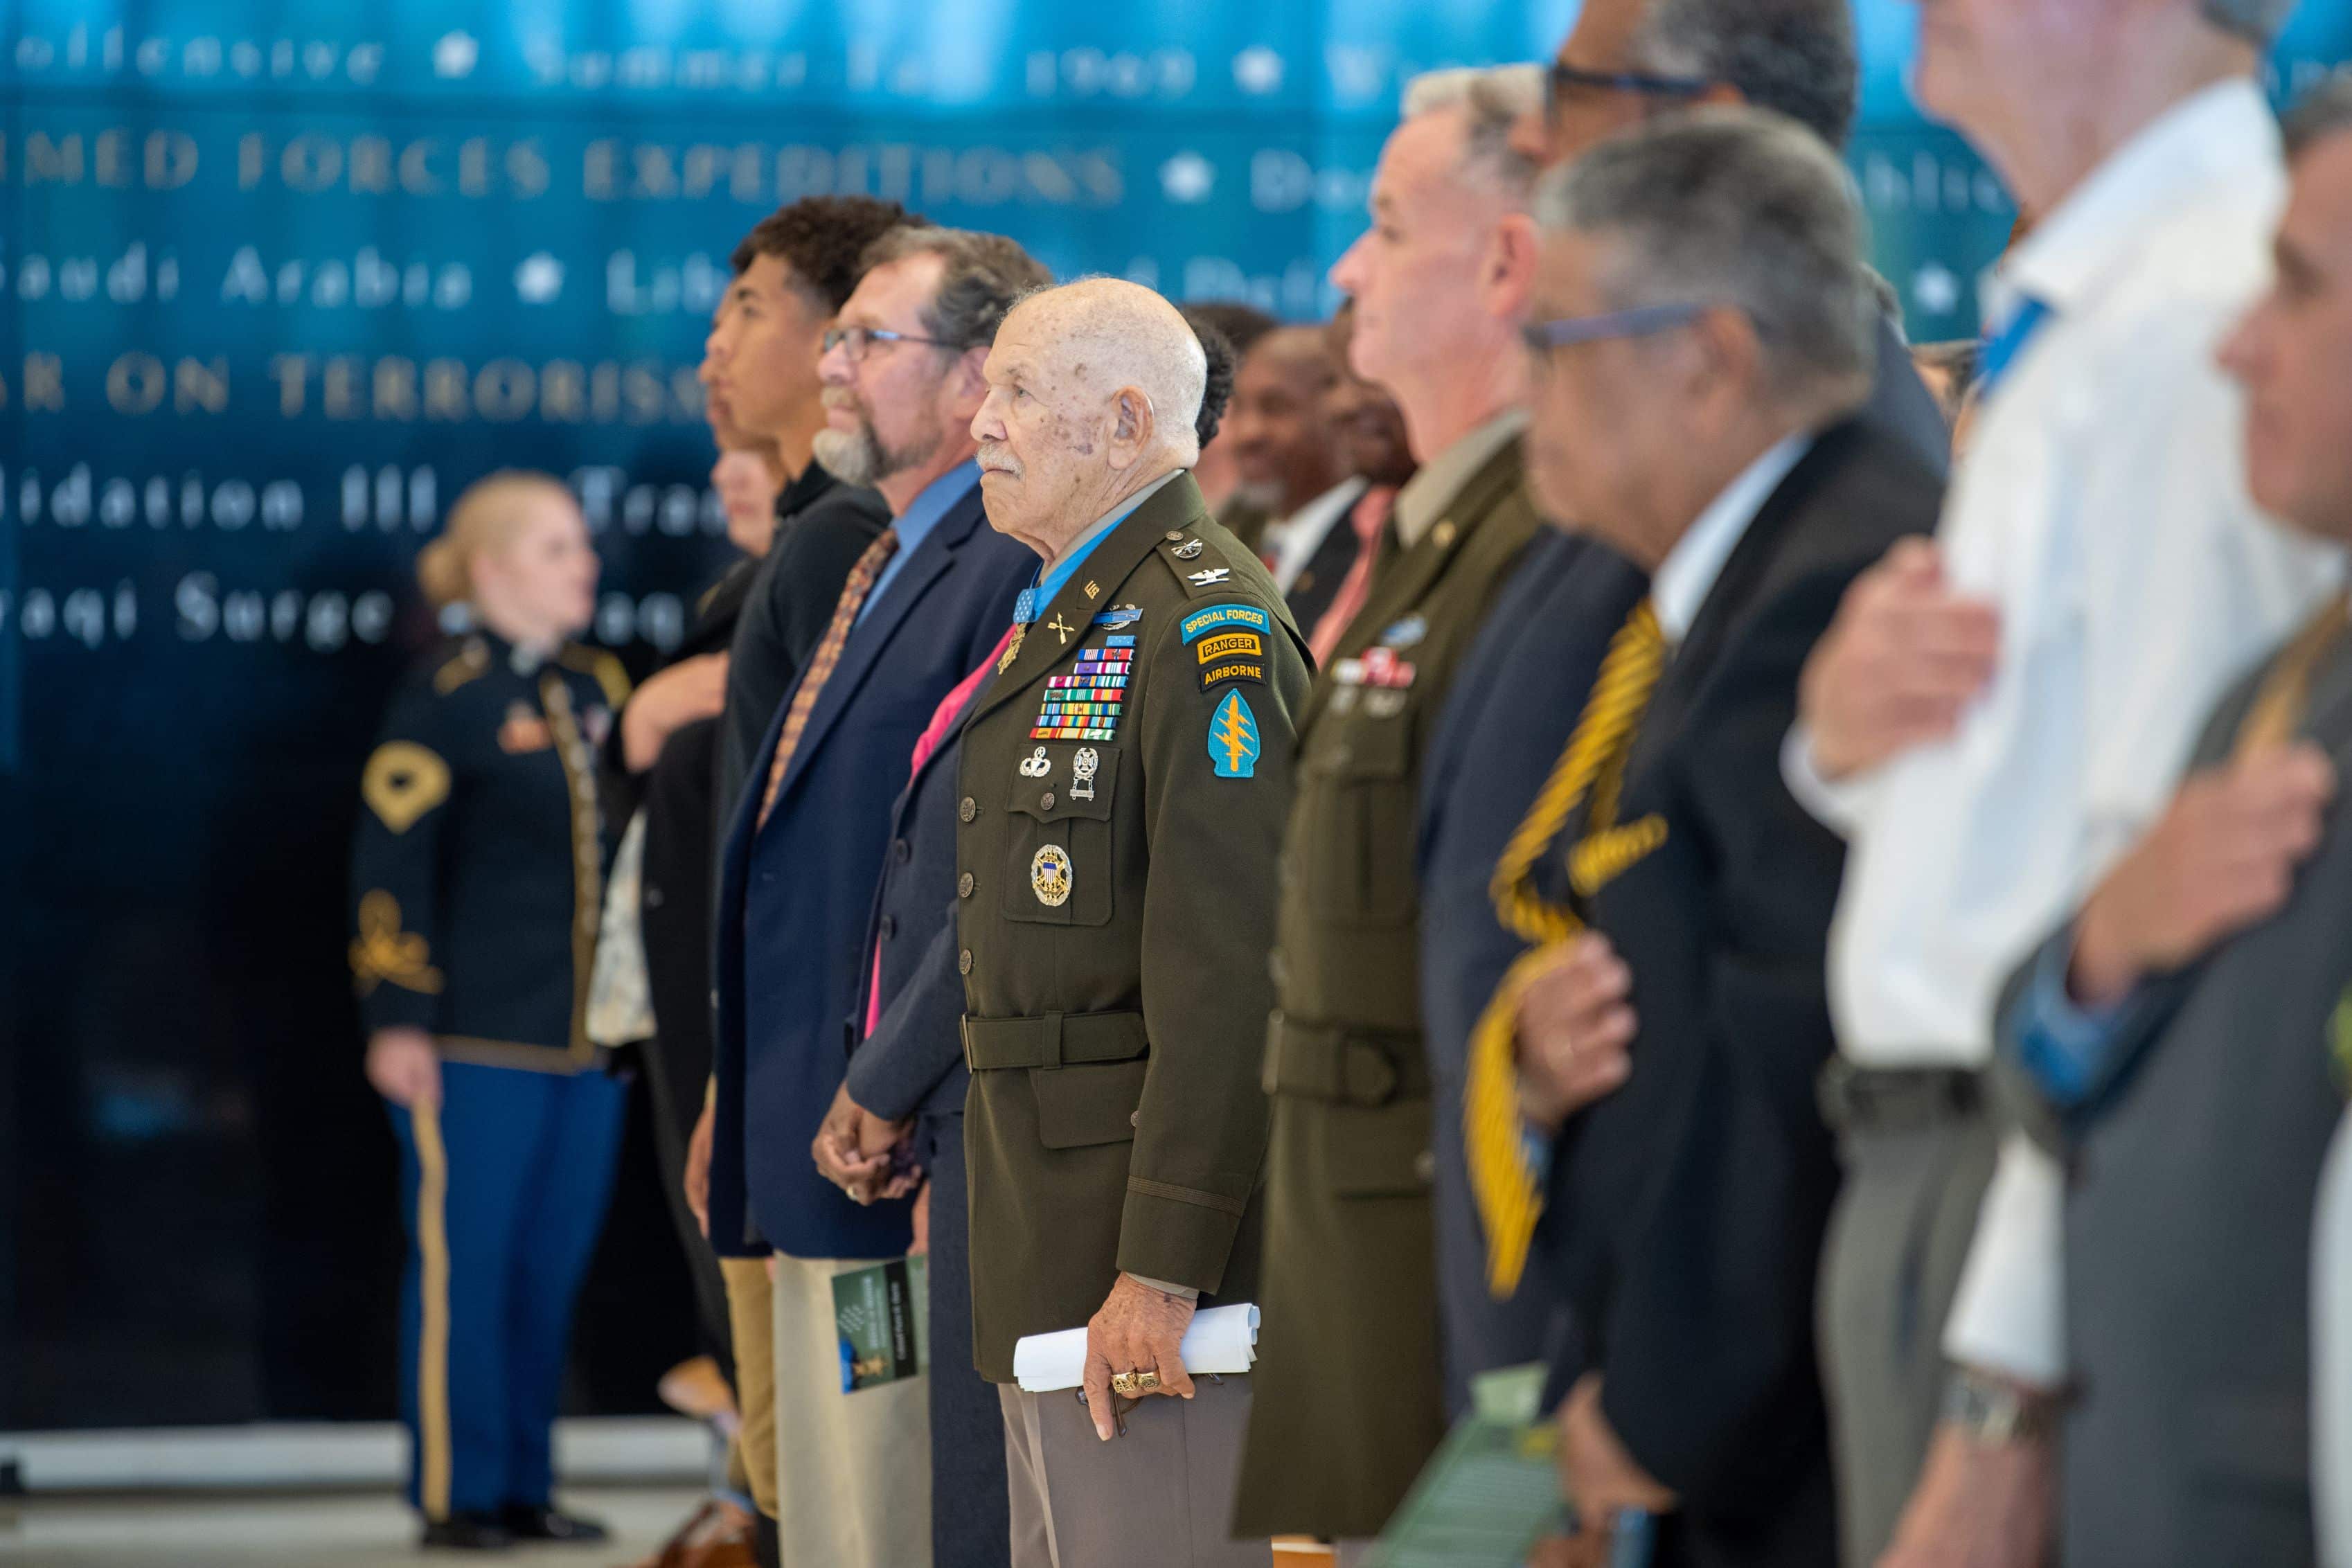 The audience stands as Director of the Army Staff, Lt. Gen. Walter E. Piatt arrives for the engraving unveiling ceremony in honor of Medal of Honor recipient, retired U.S. Army Col. Paris Davis, at the National Museum of the U.S. Army, Fort Belvoir, Va., Aug. 9, 2023.